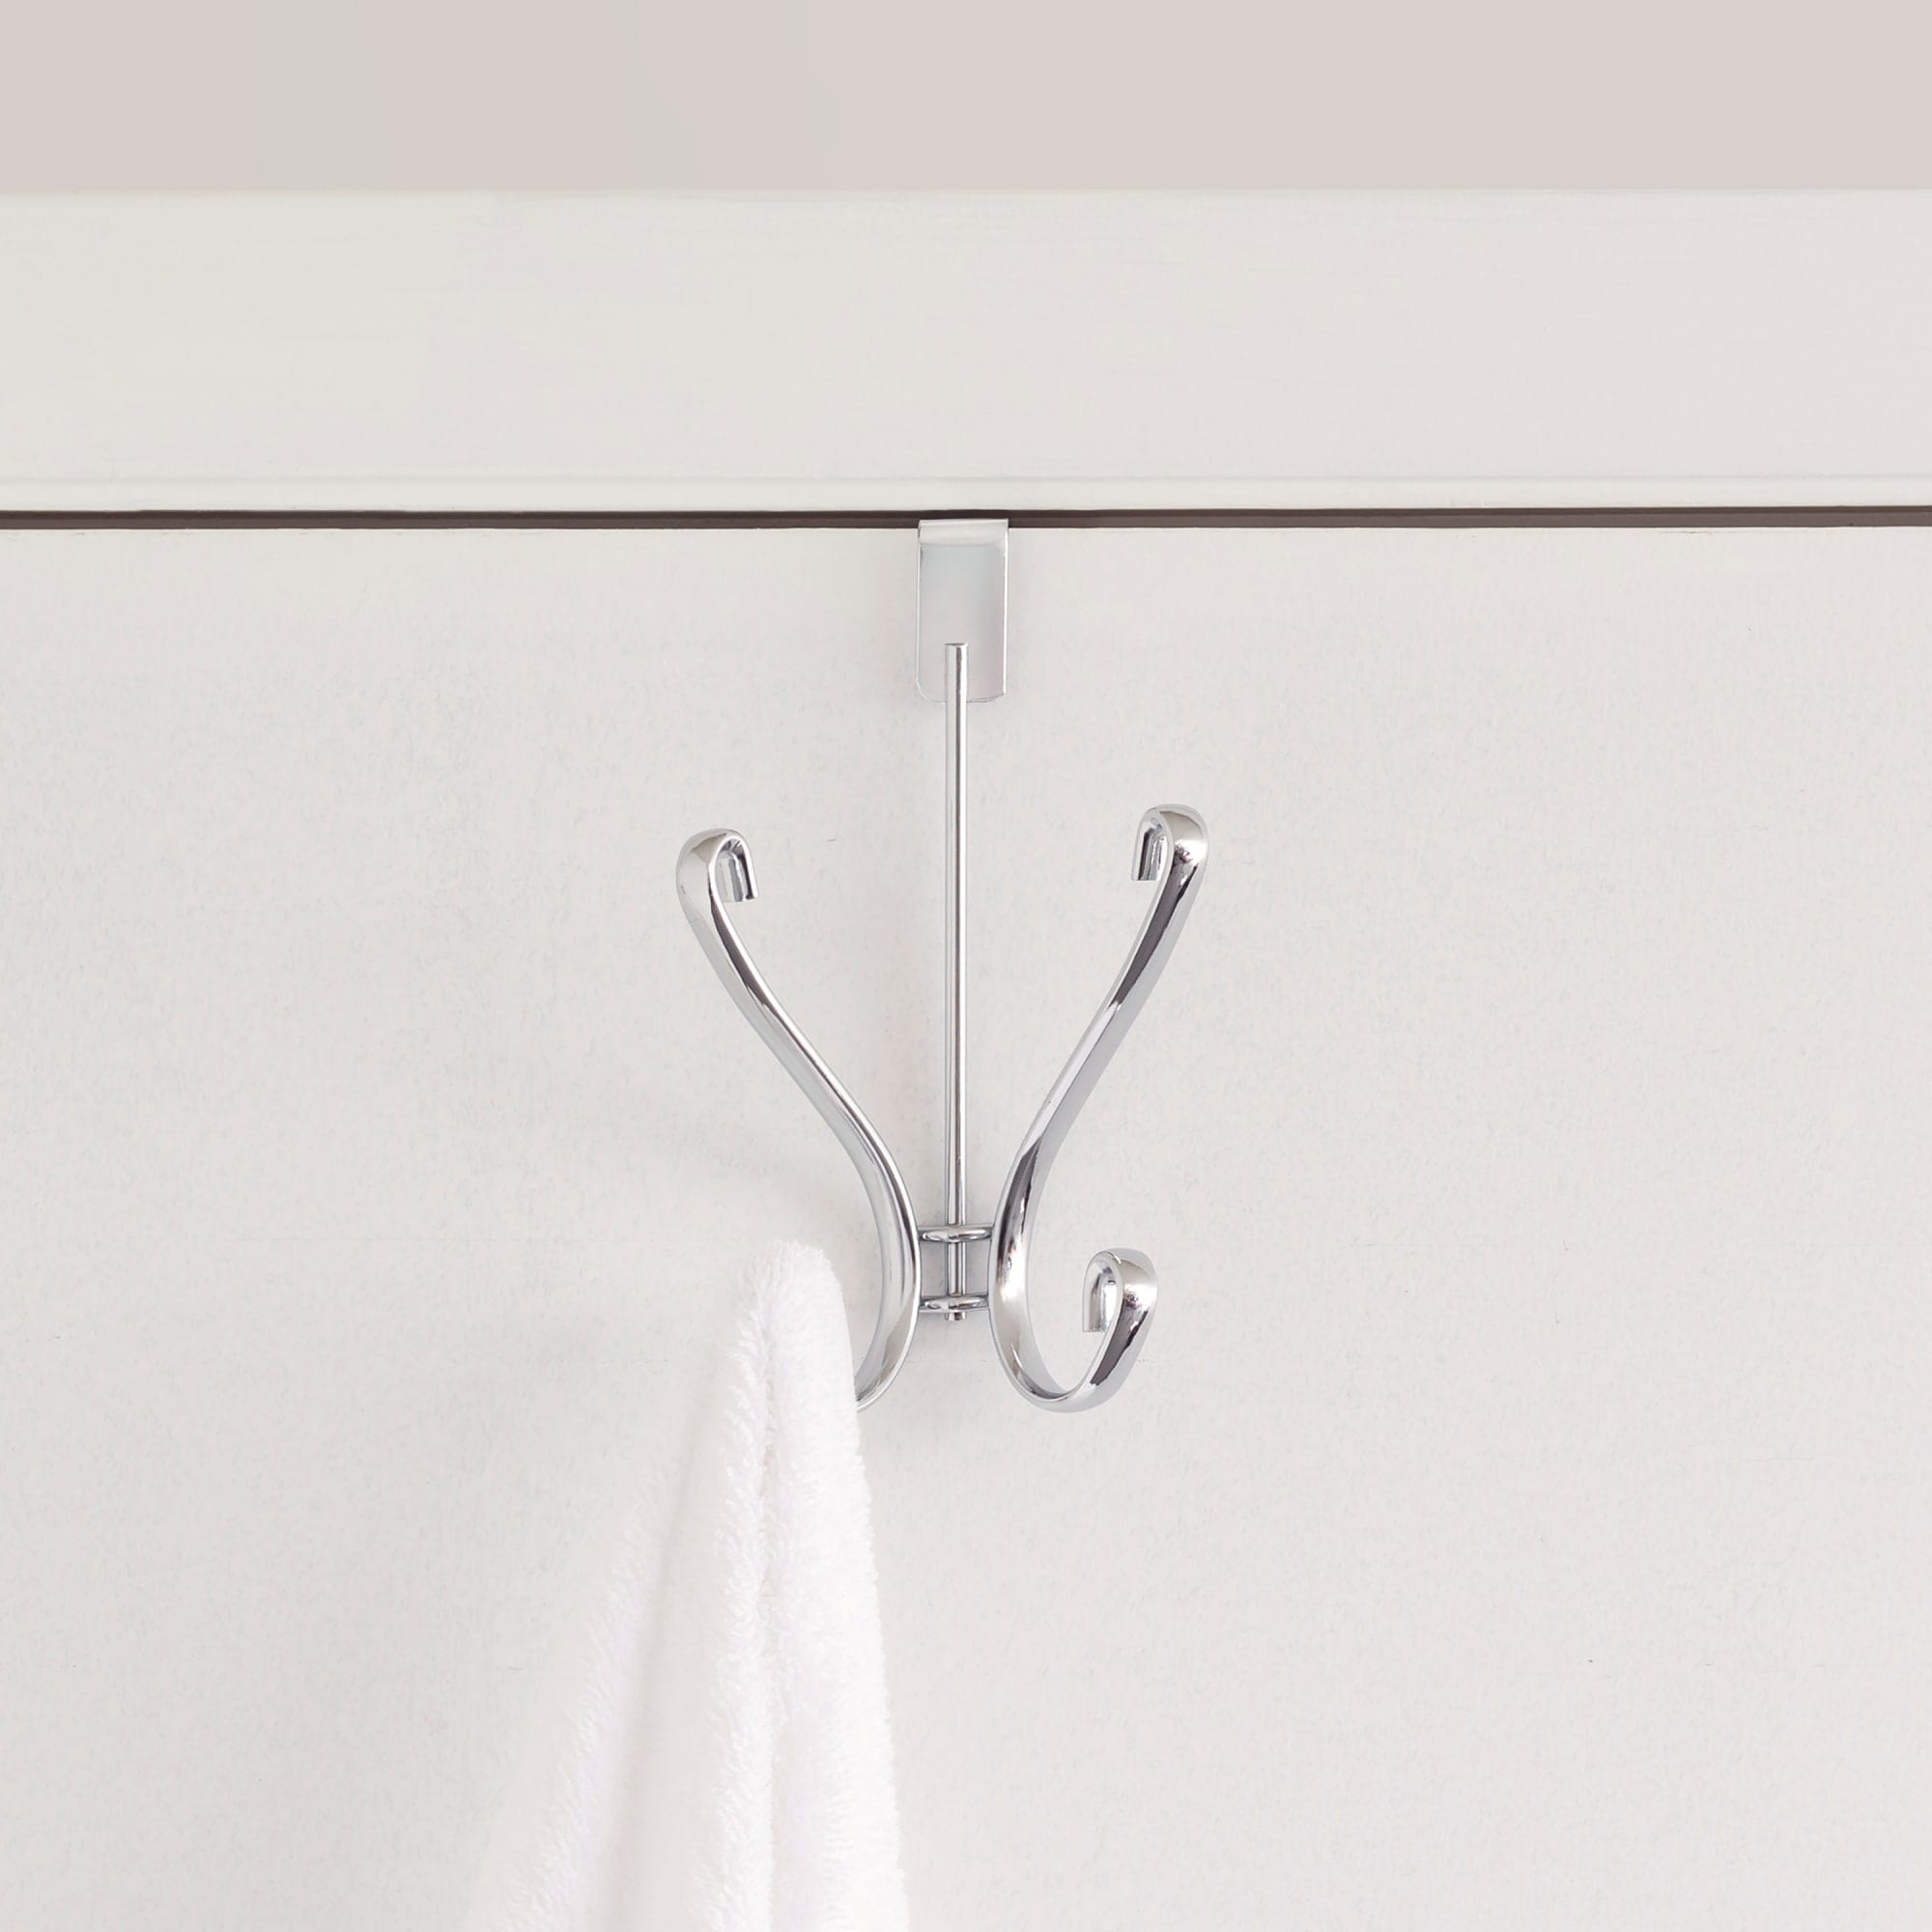 Home Basics Over the Door Double Hanging Hook, Chrome $3.00 EACH, CASE PACK OF 12